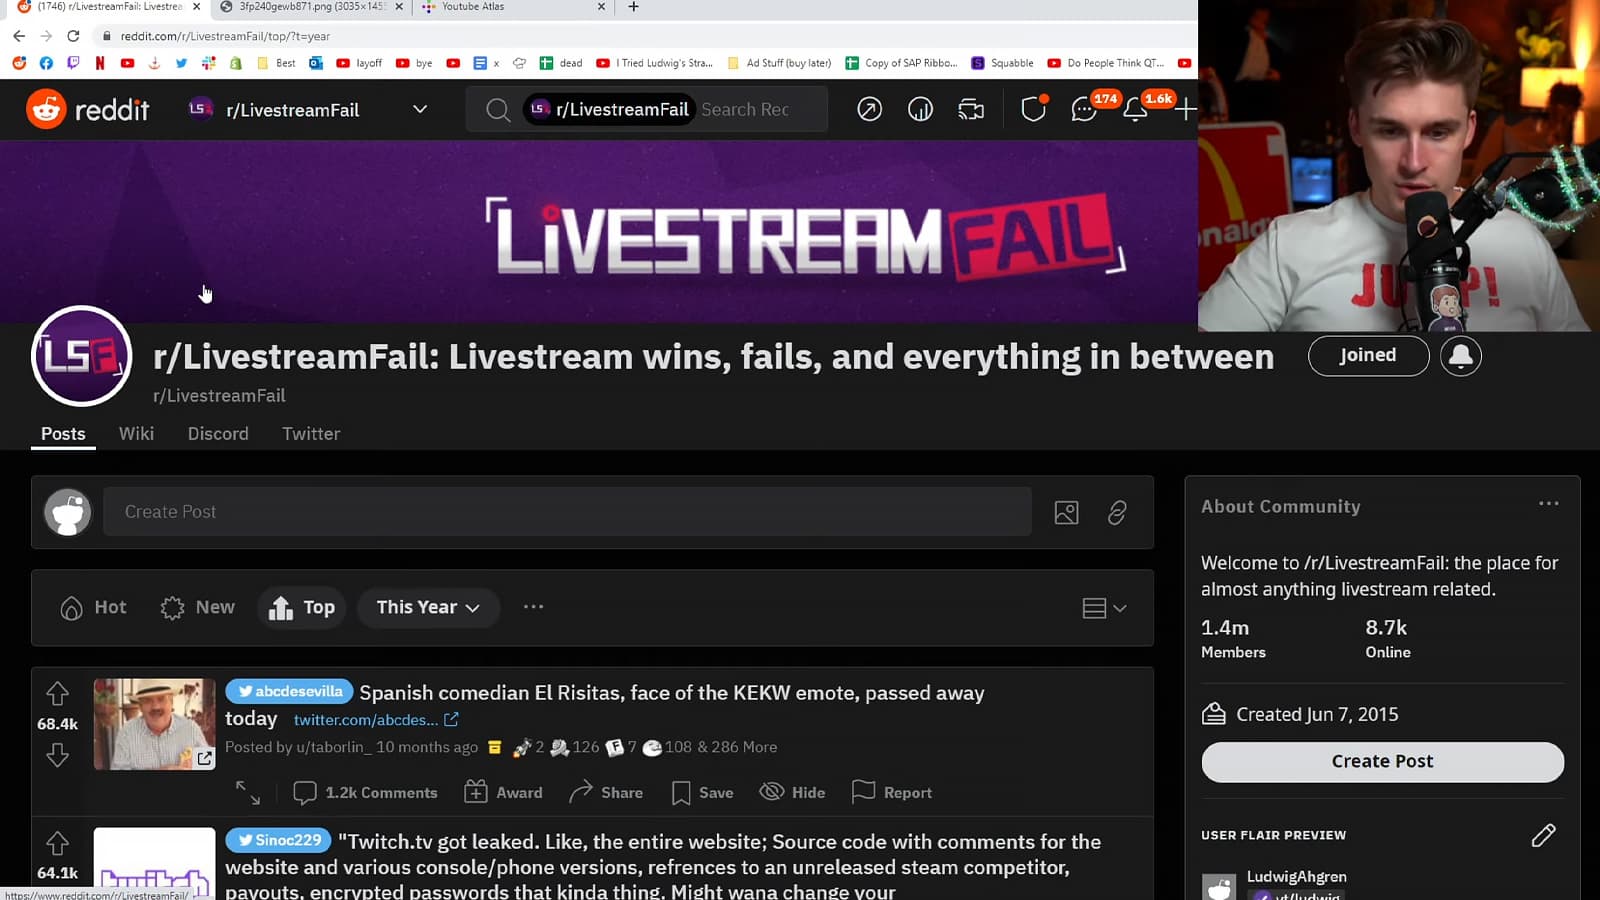 Ludwig explains why LivestreamFail subreddit is “bad” for Twitch - Dexerto